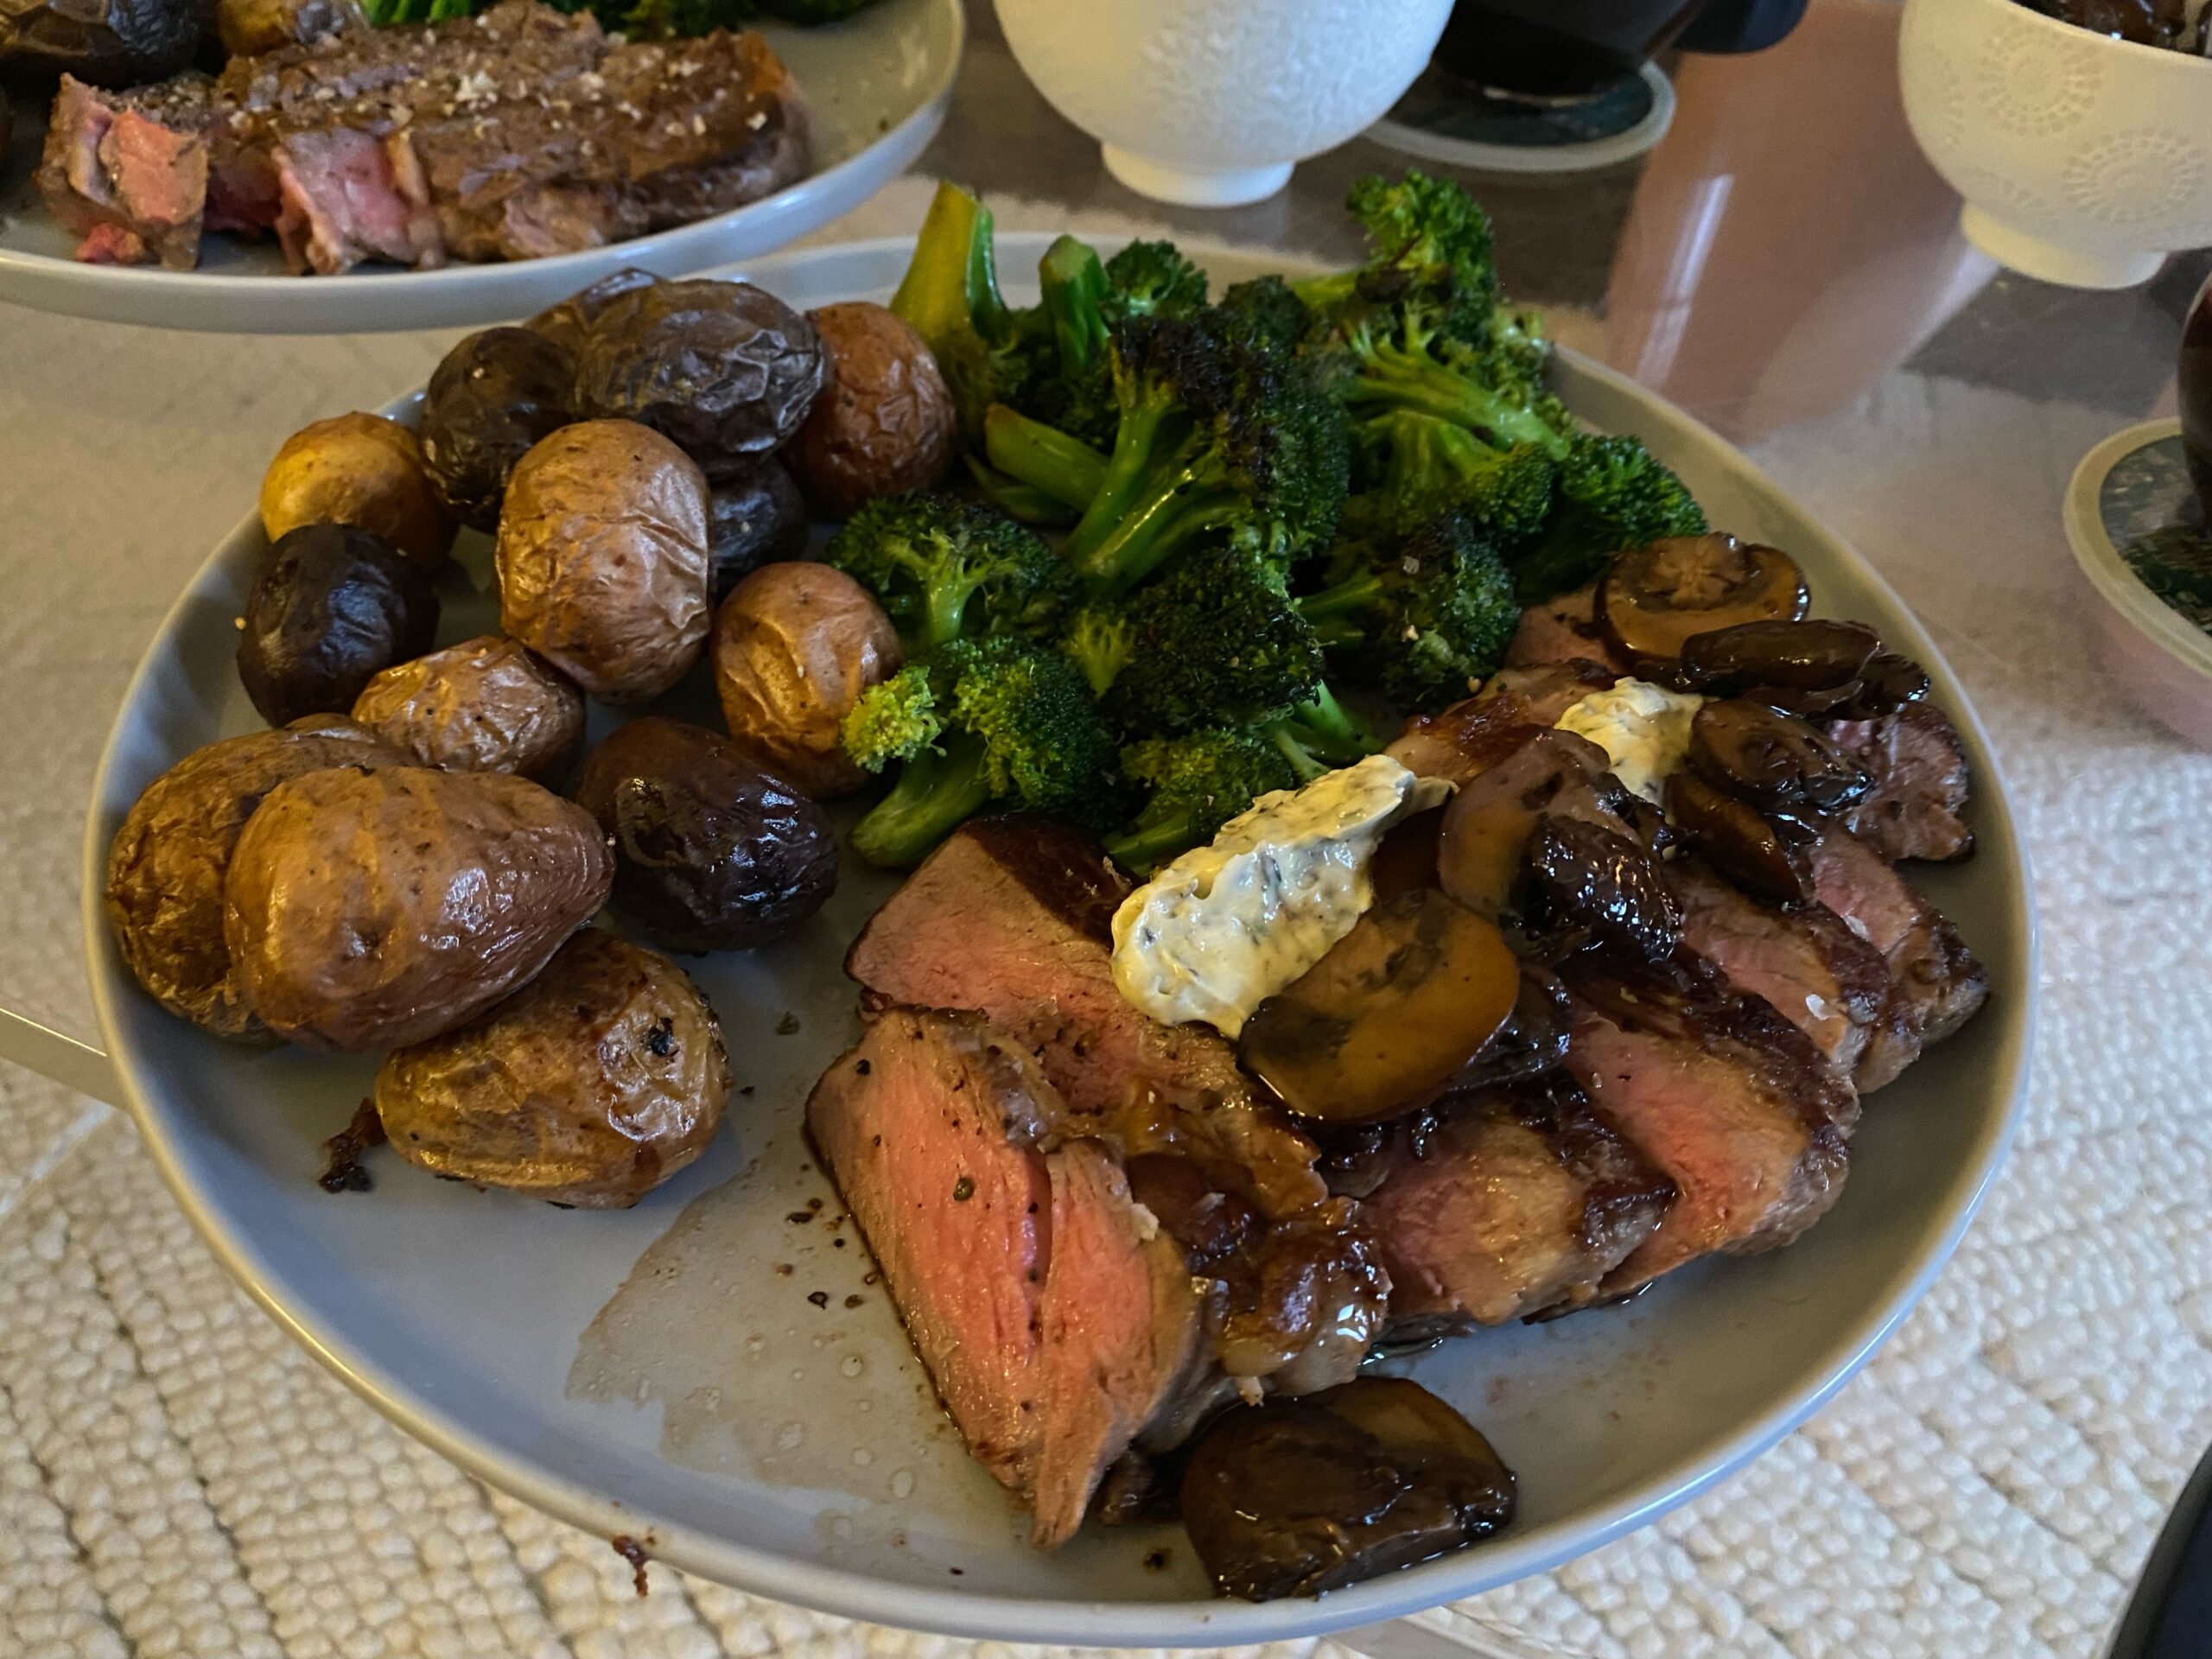 Steak, potatoes, and broccoli after a long week of mixing and recording sessions